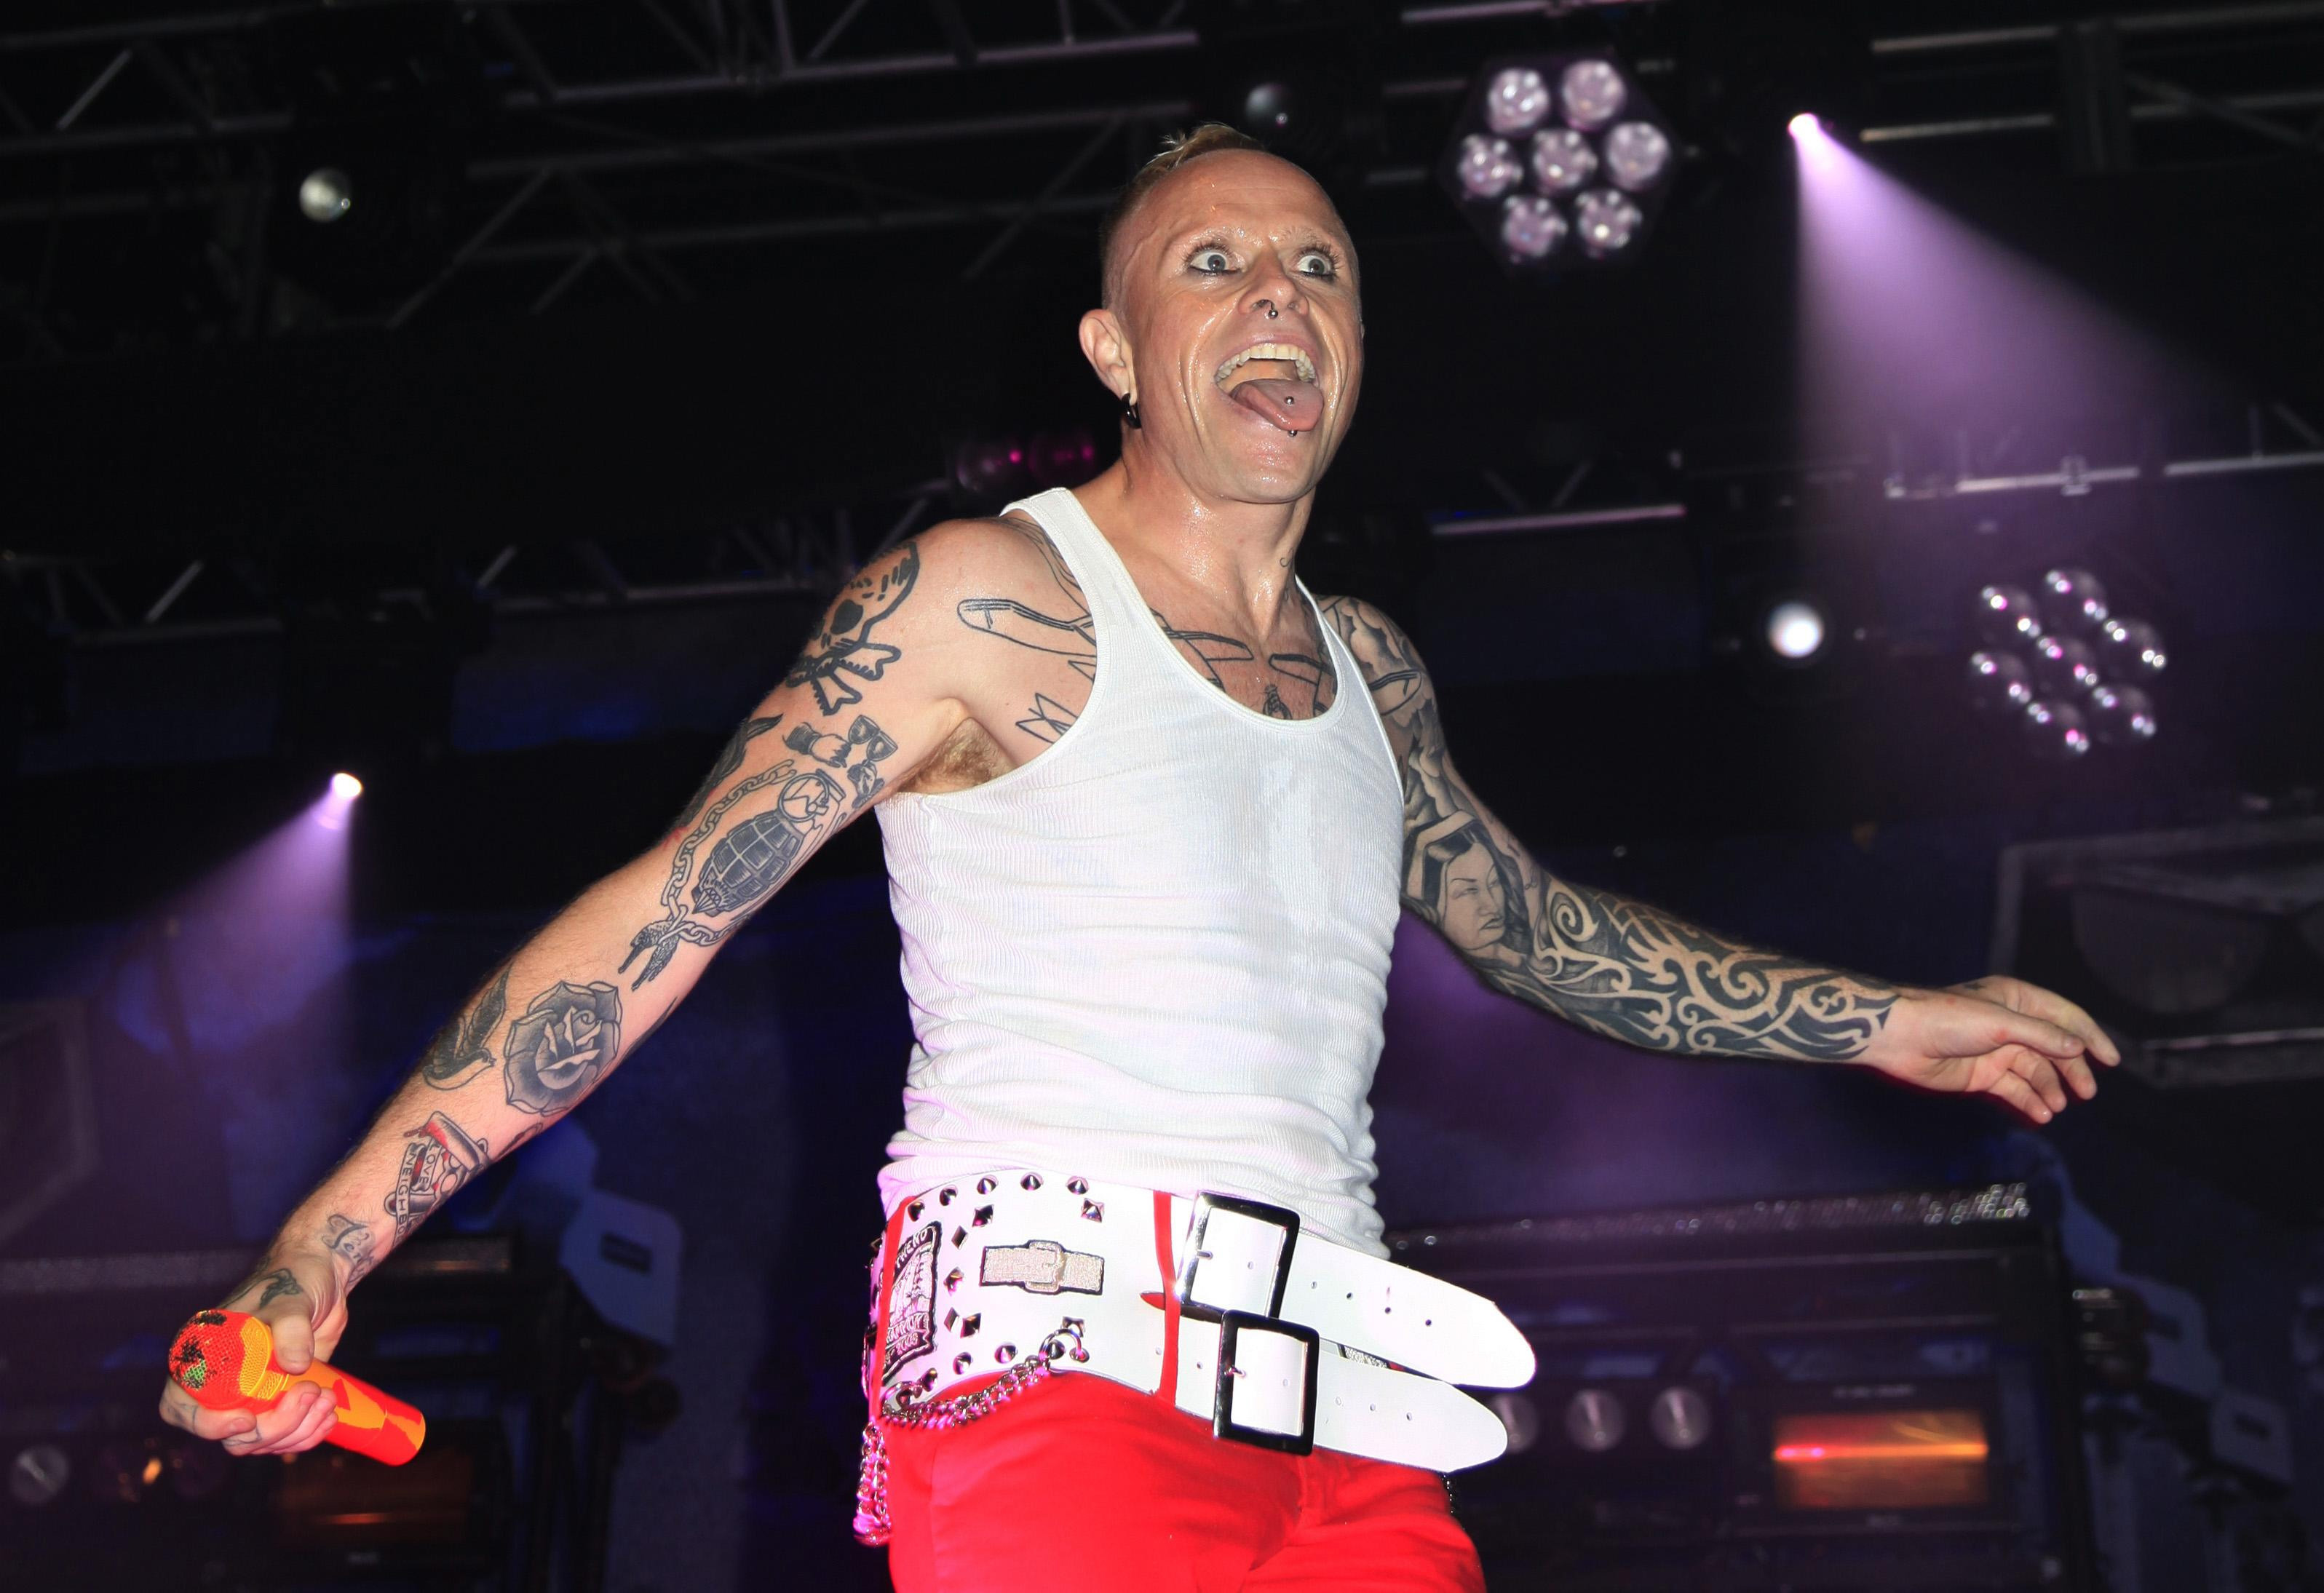 keith flint prodigy suicide